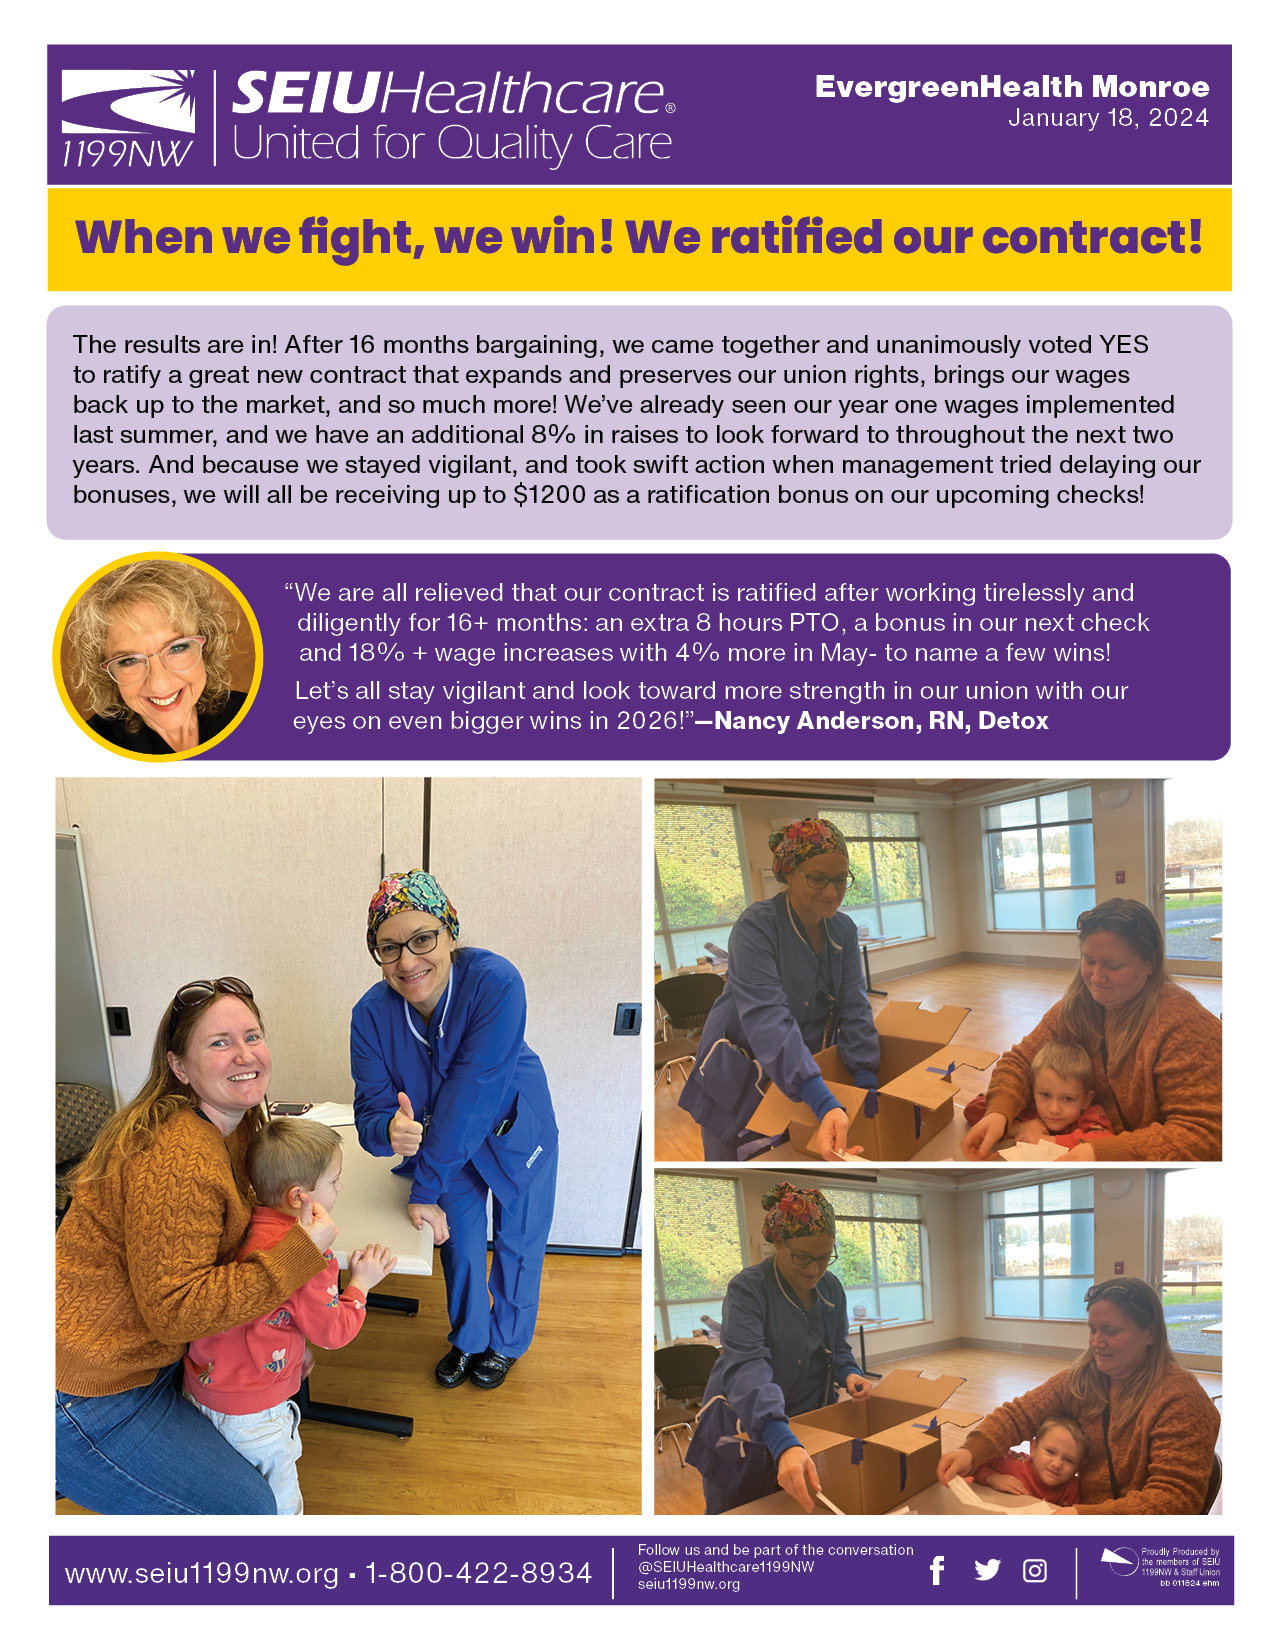 When we fight, we win! We ratified our contract!